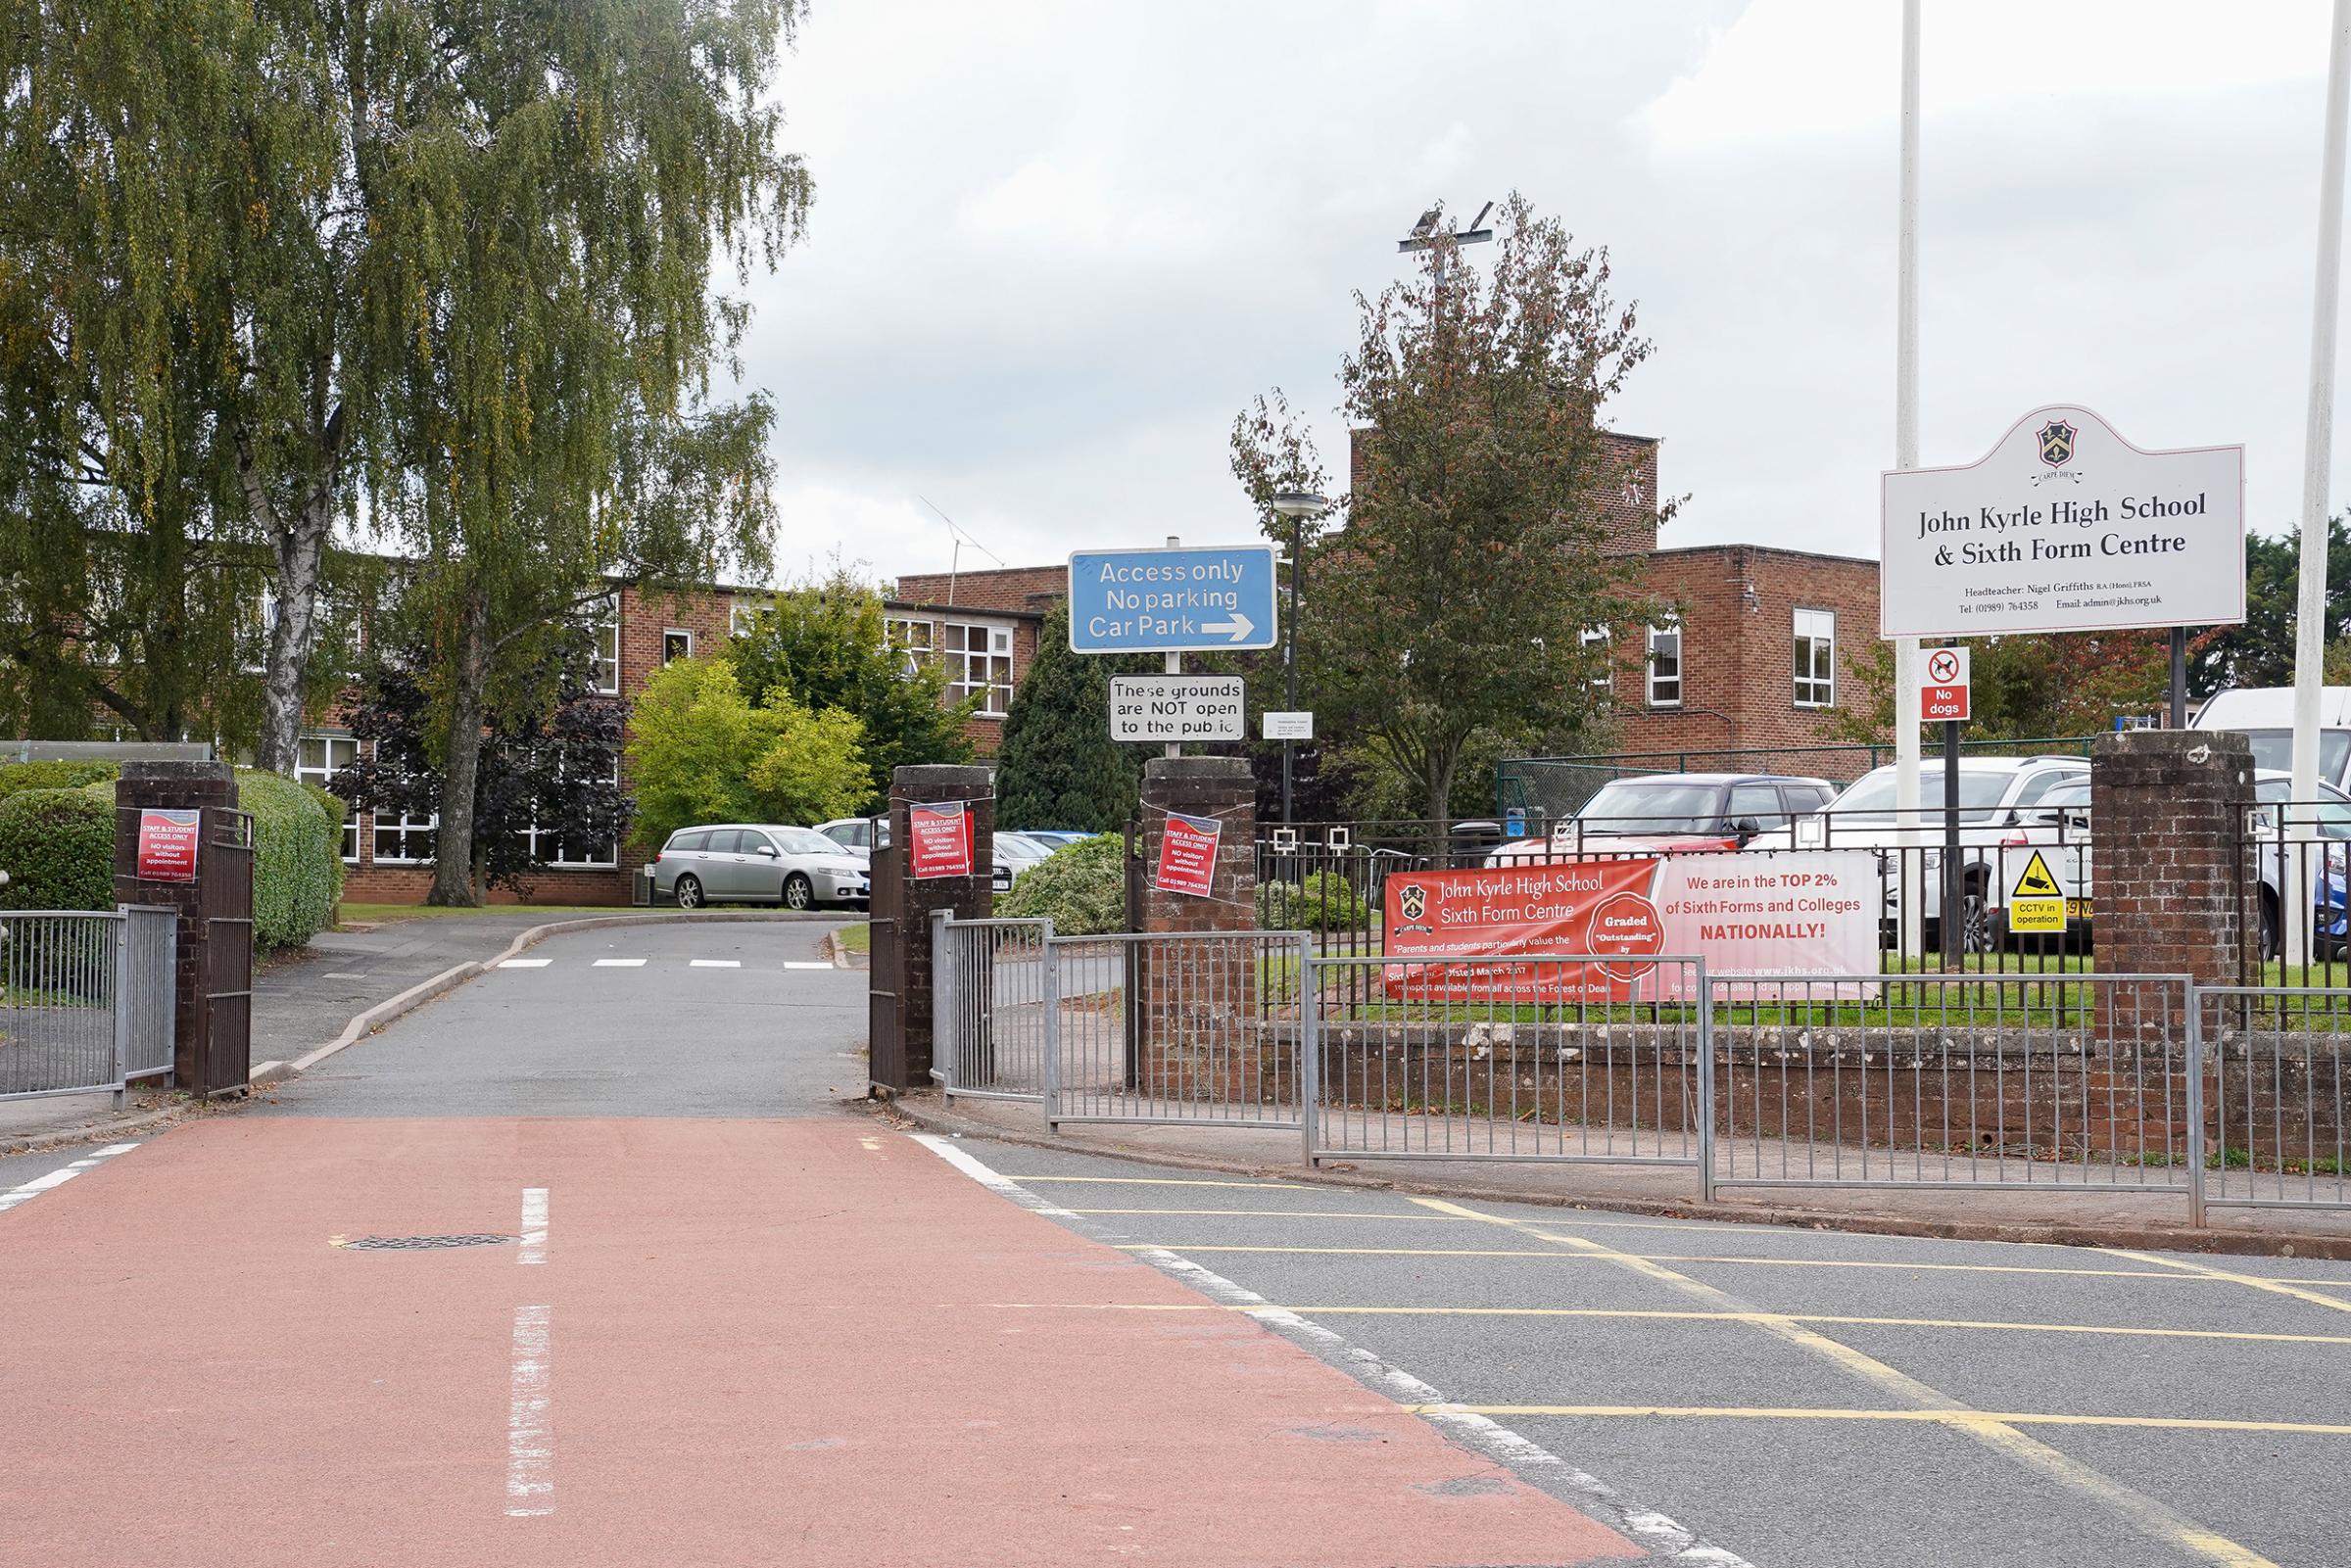 The school, in Ross-on-Wyes Ledbury Road, has more than 1,400 pupils 